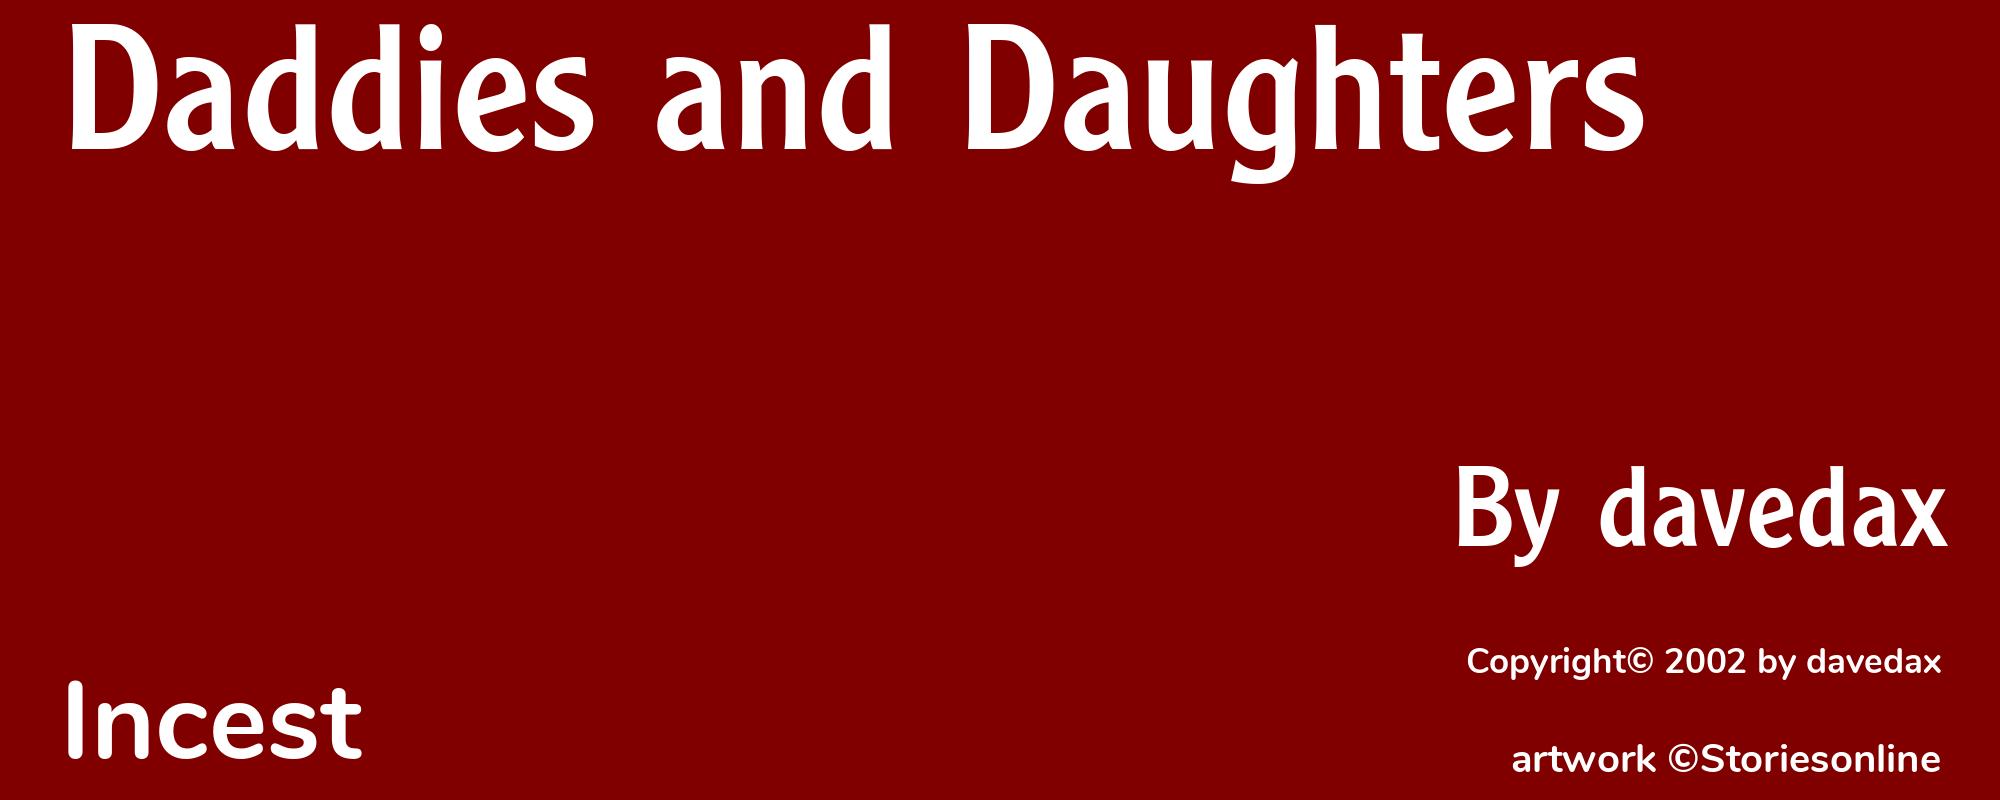 Daddies and Daughters - Cover